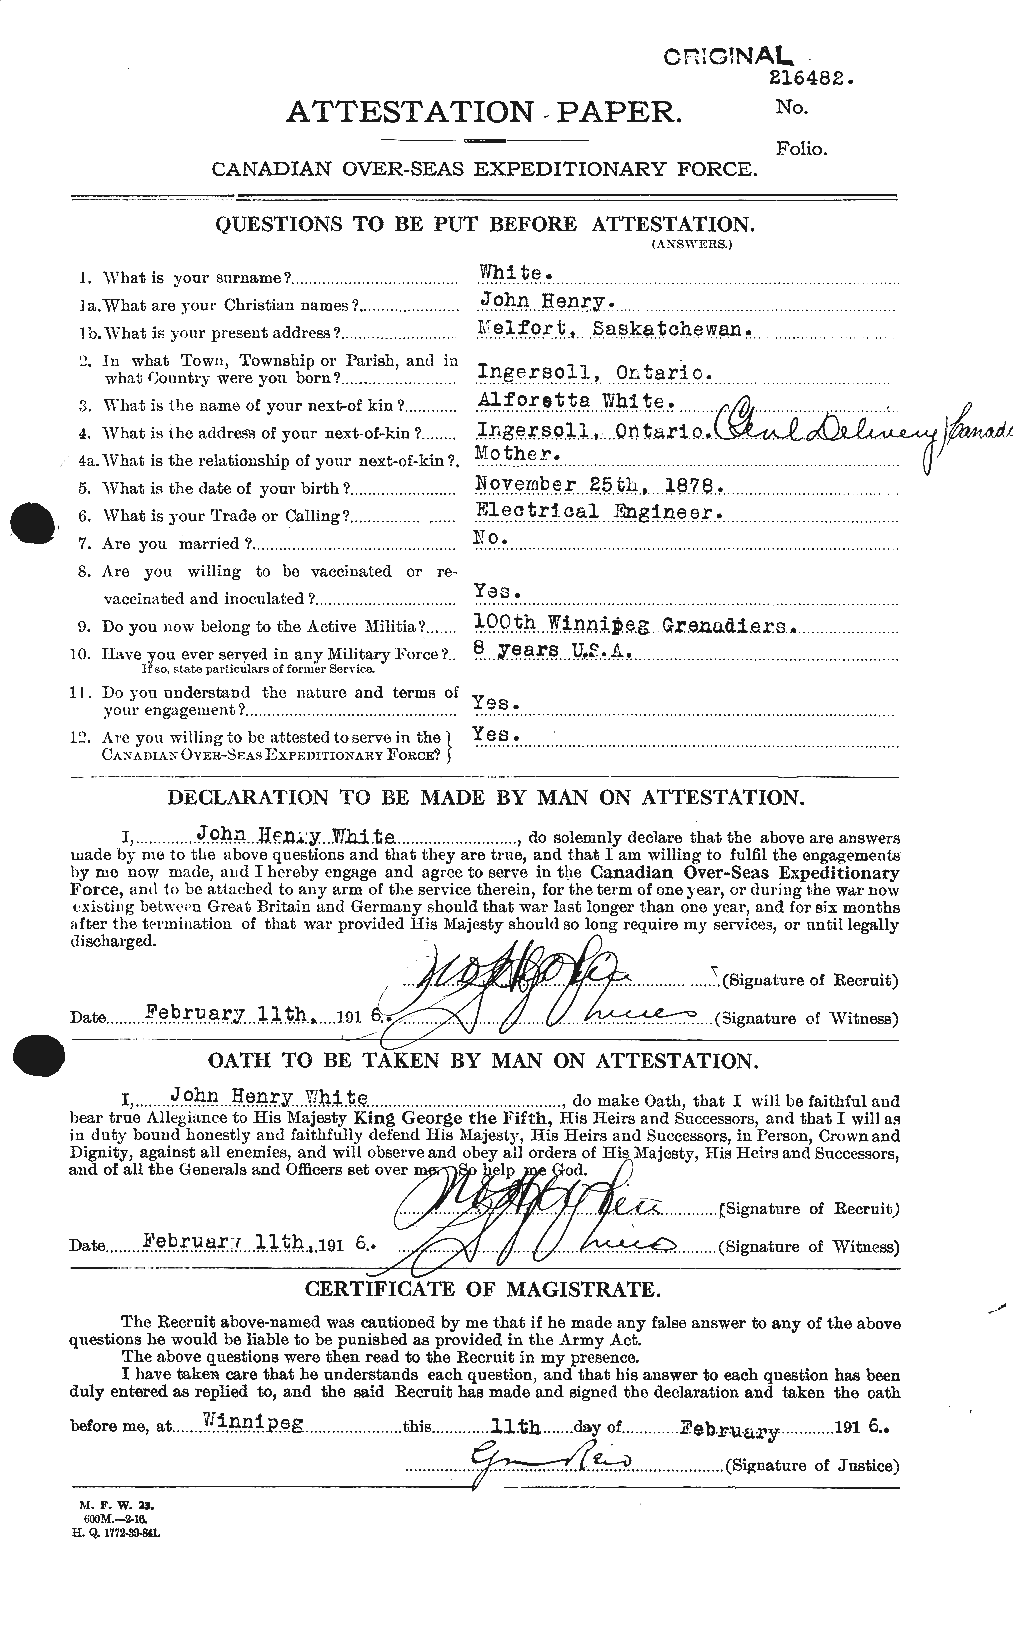 Personnel Records of the First World War - CEF 671567a